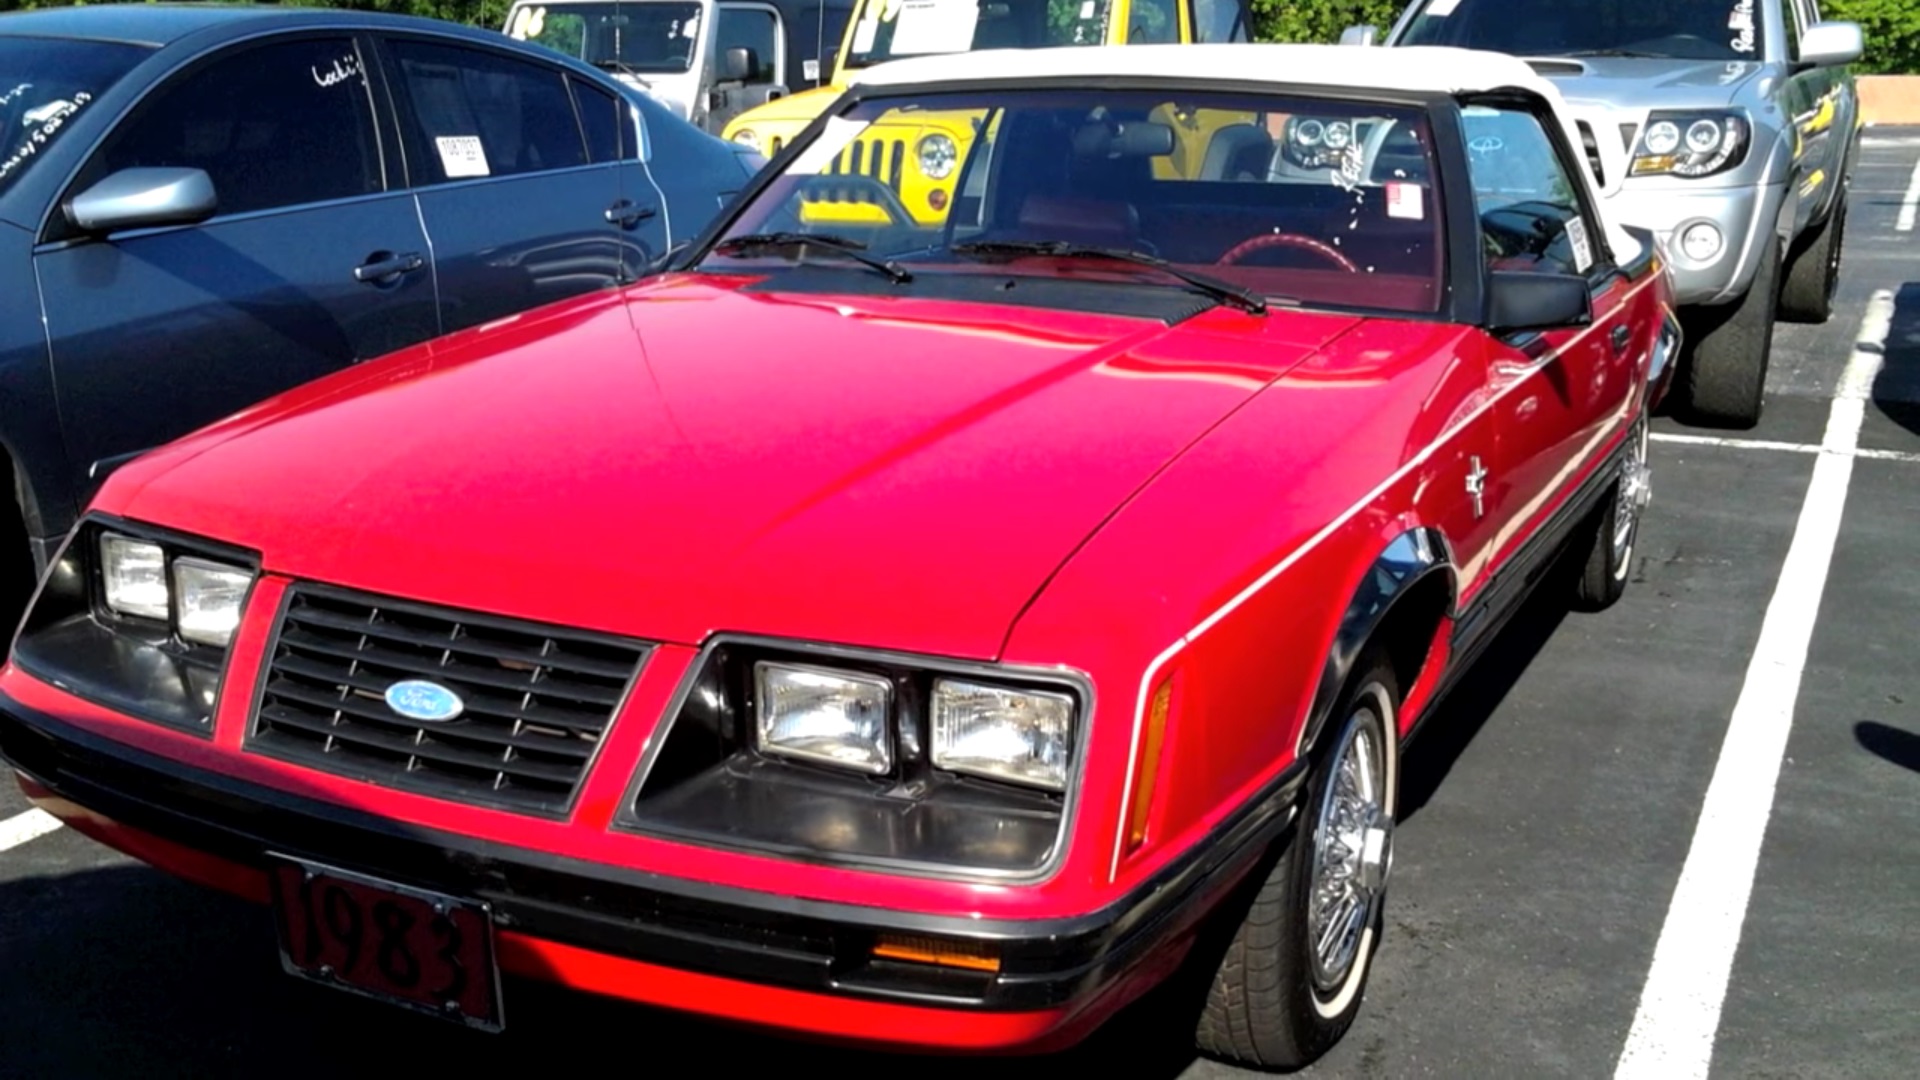 Video: 1983 Ford Mustang GLX Convertible Full Tour